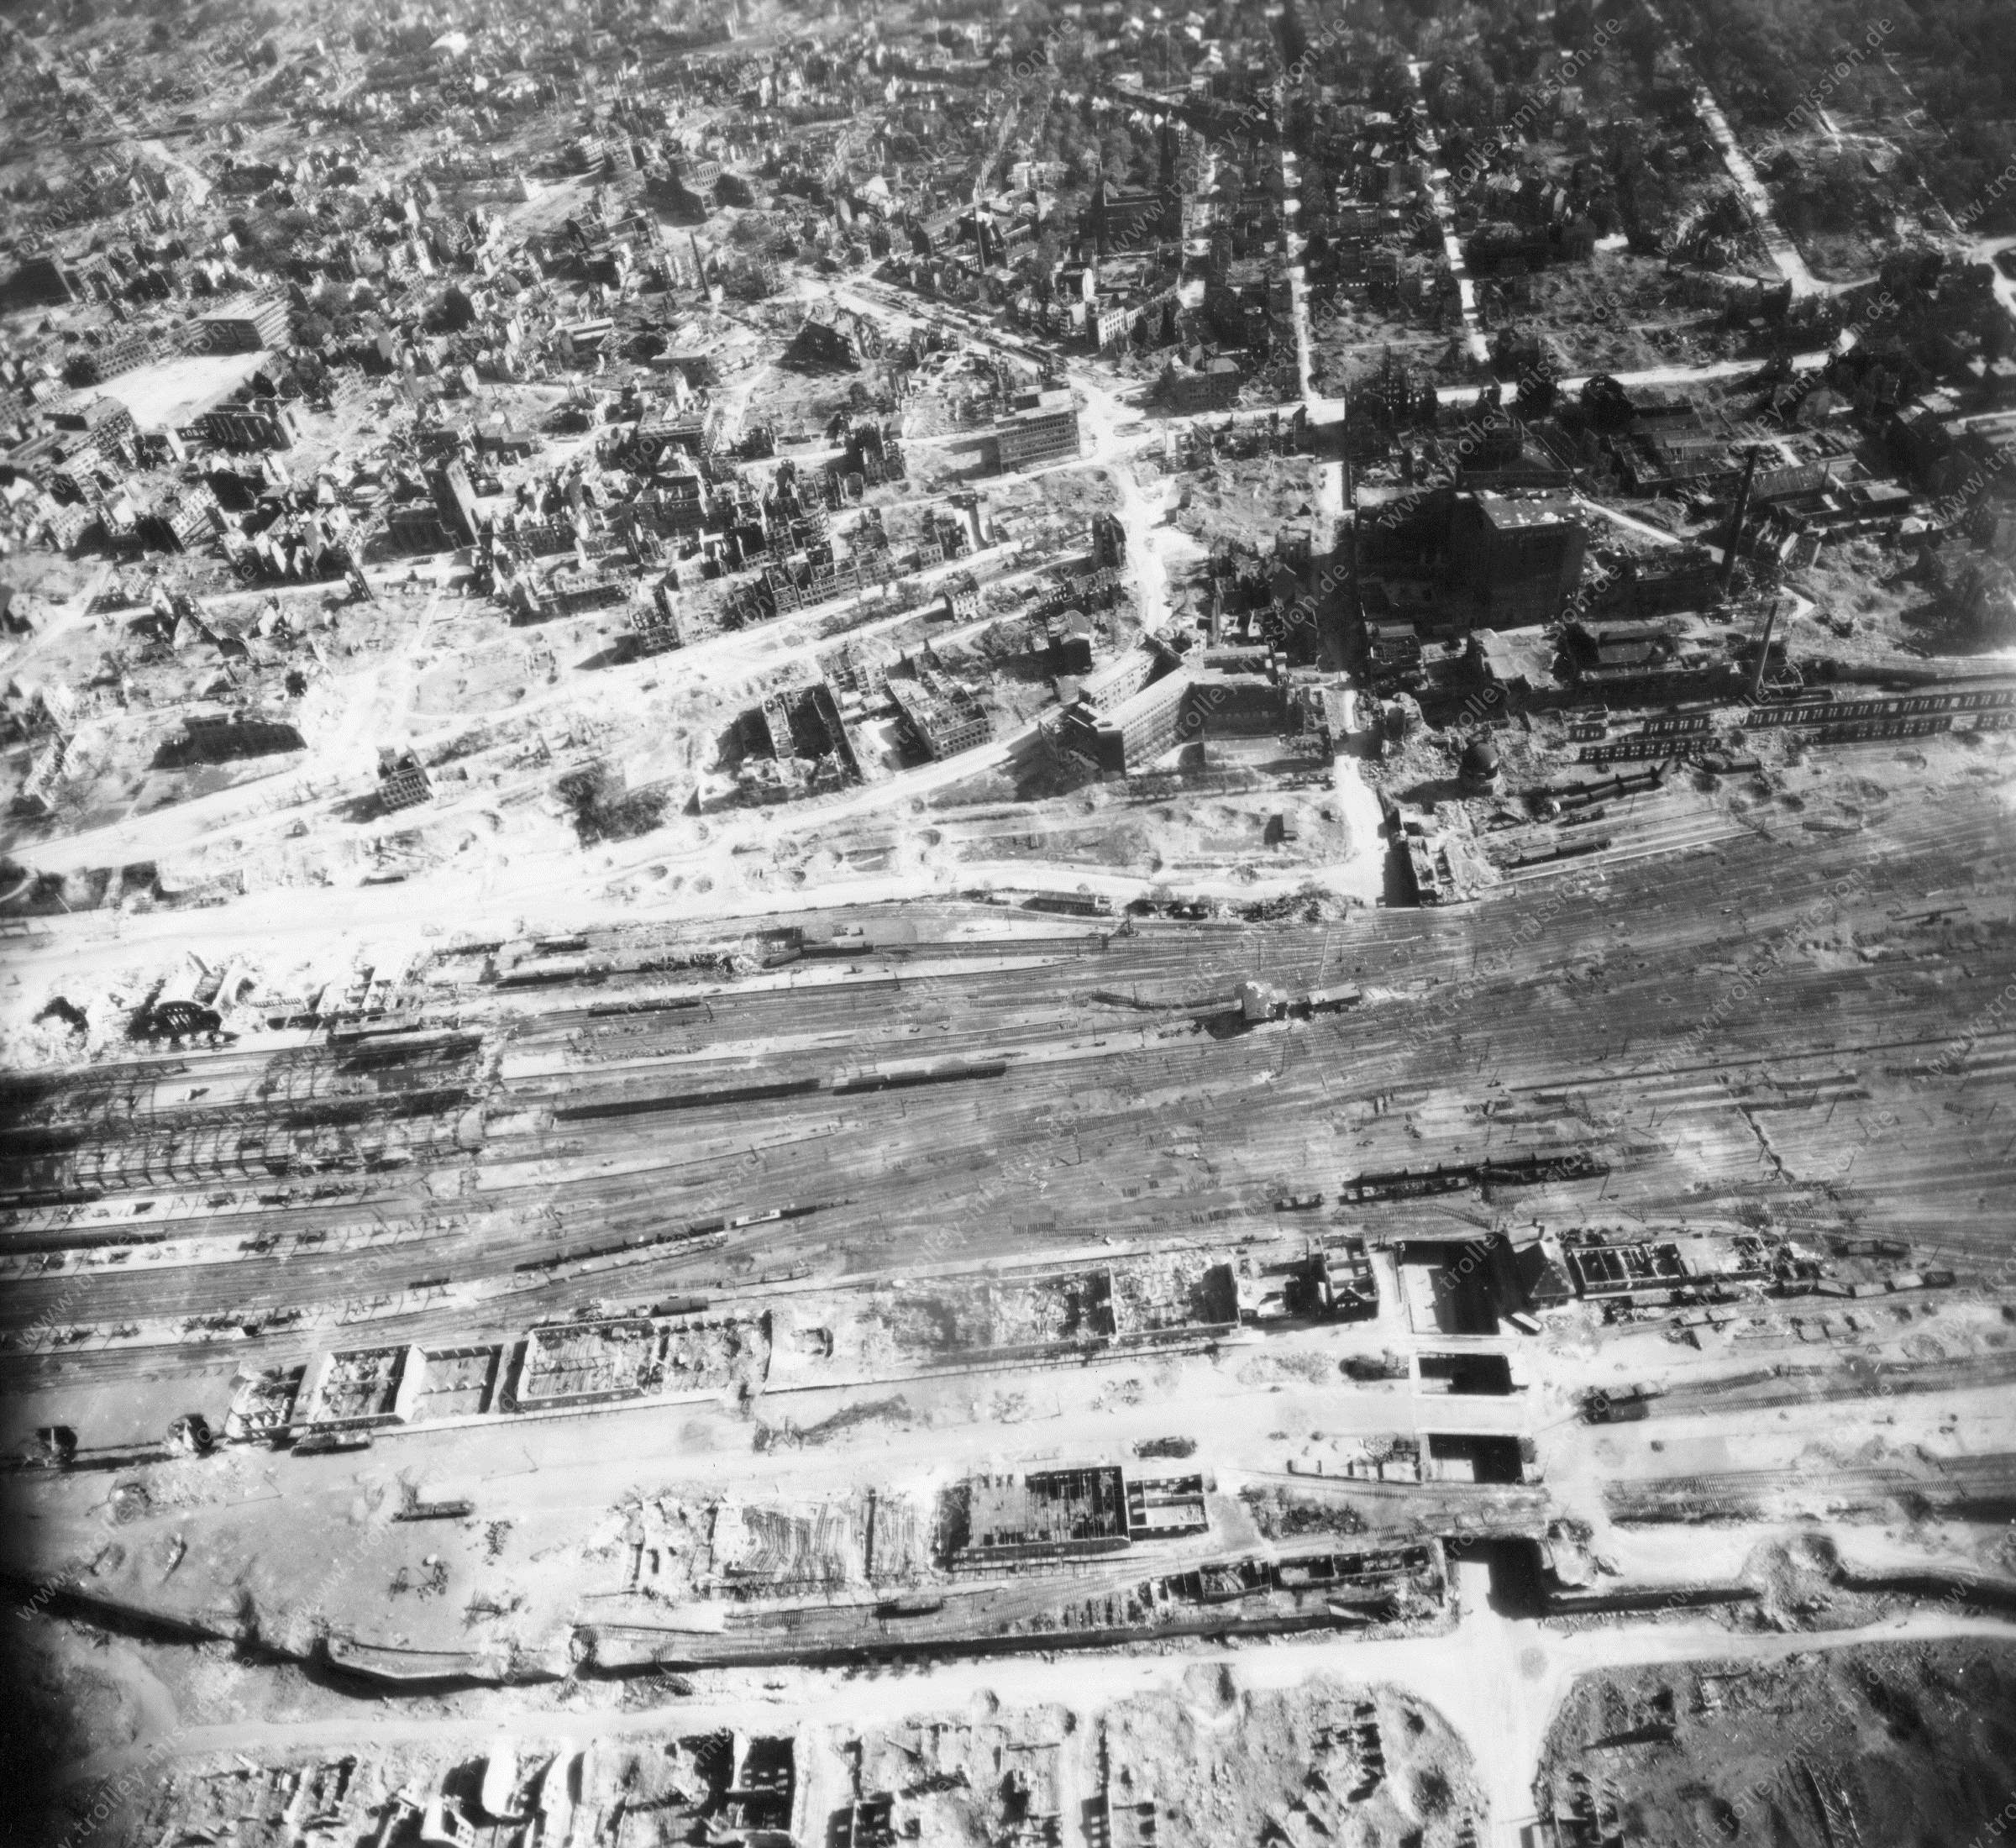 Dortmund from above: Aerial view after Allied air raids in World War II